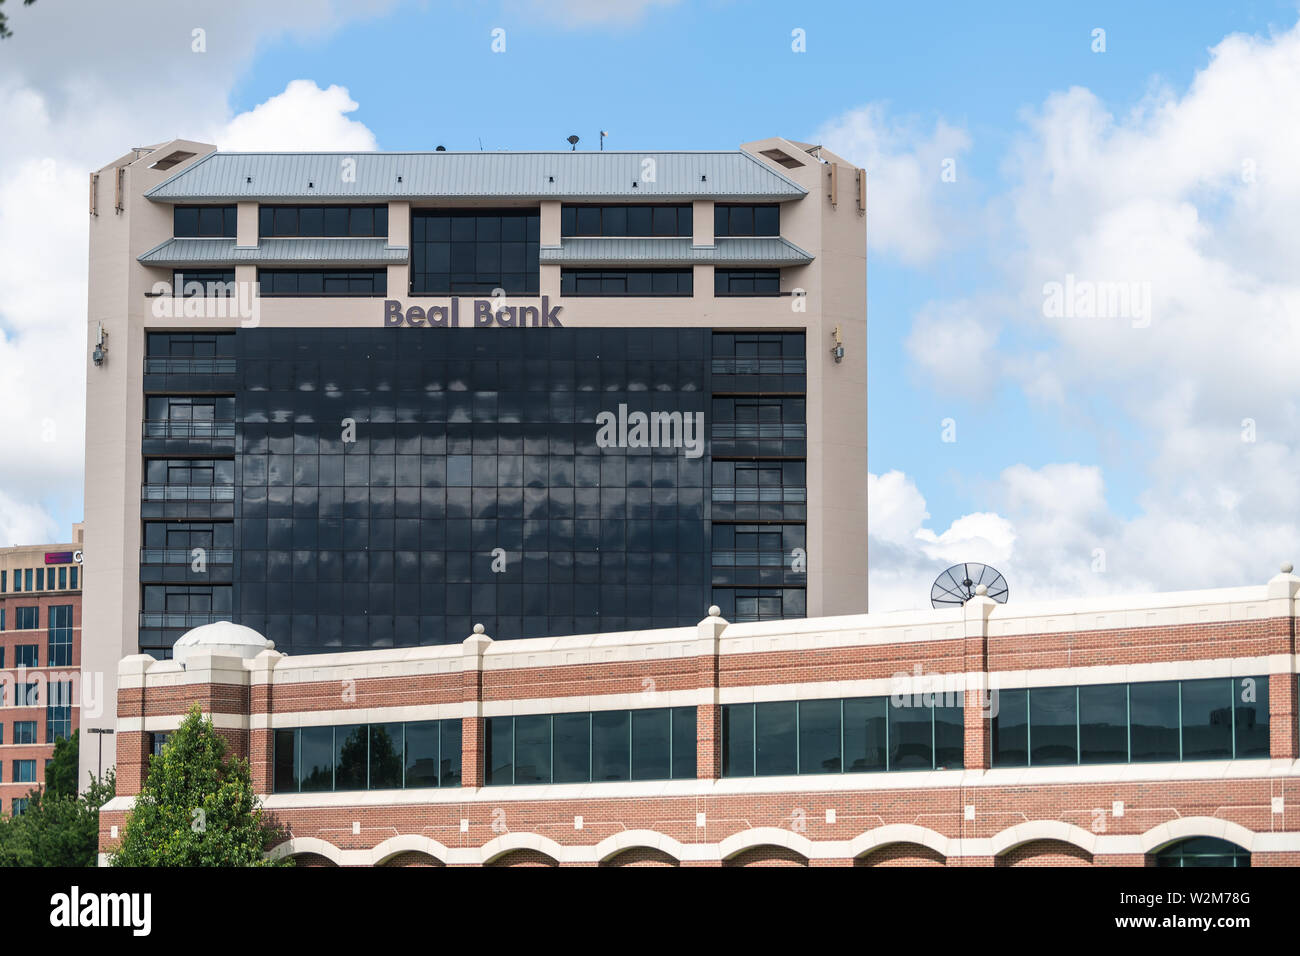 Dallas, USA - June 7, 2019: Downtown buildings and sign for Beal Bank in Texas City Stock Photo